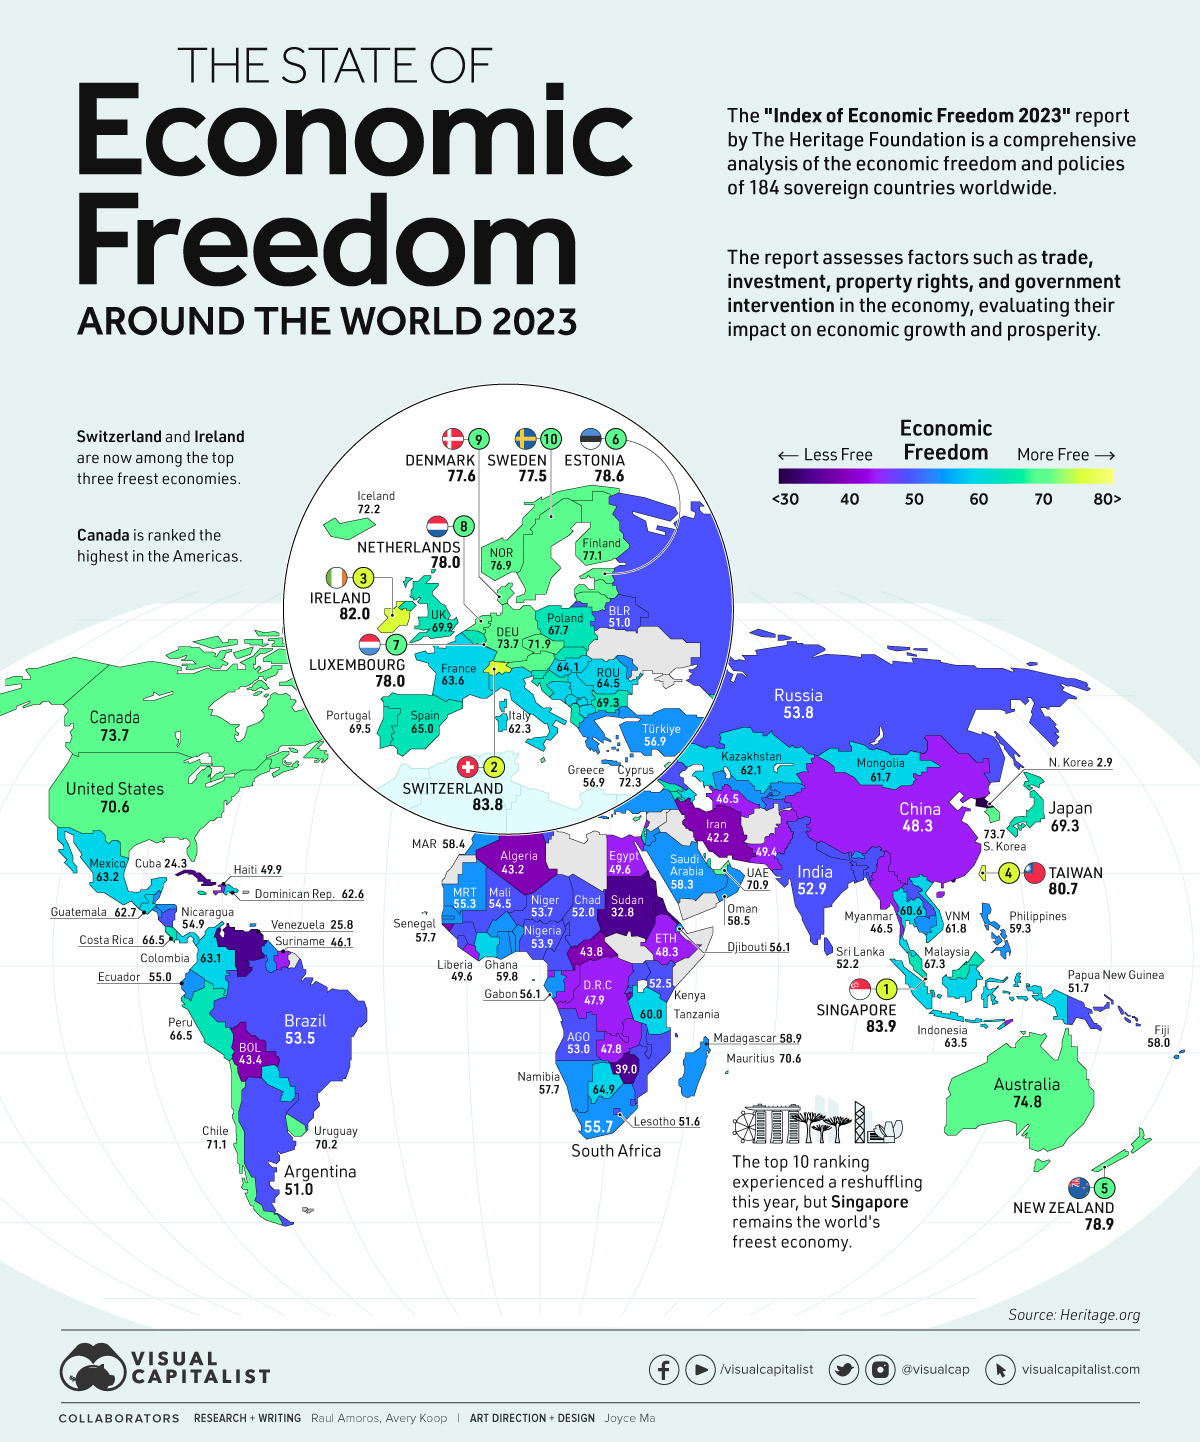 Mapped: The State of Economic Freedom in 2023